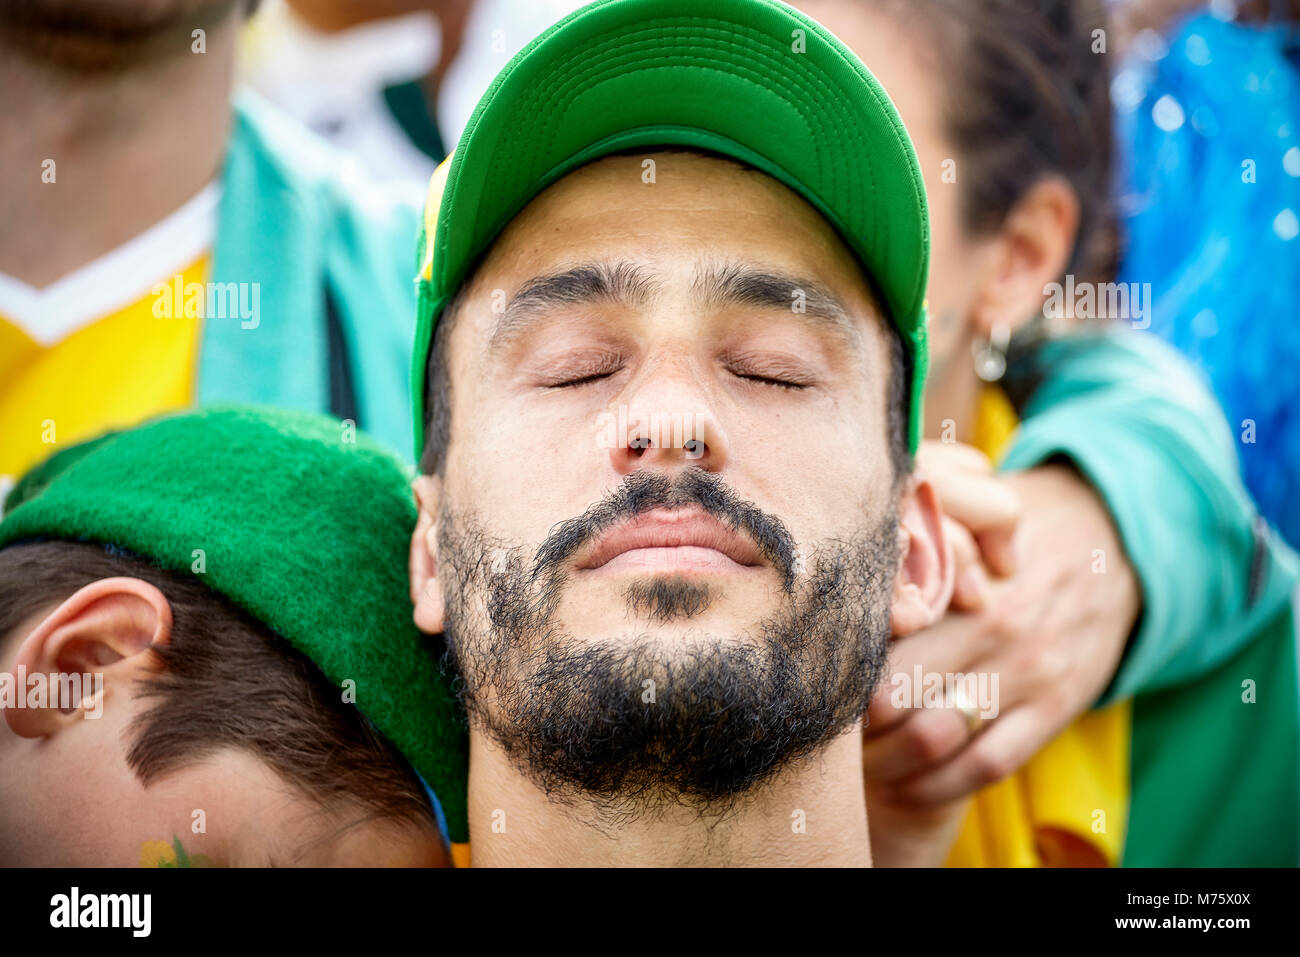 Football fan with head back and eyes closed in disappointment Stock Photo